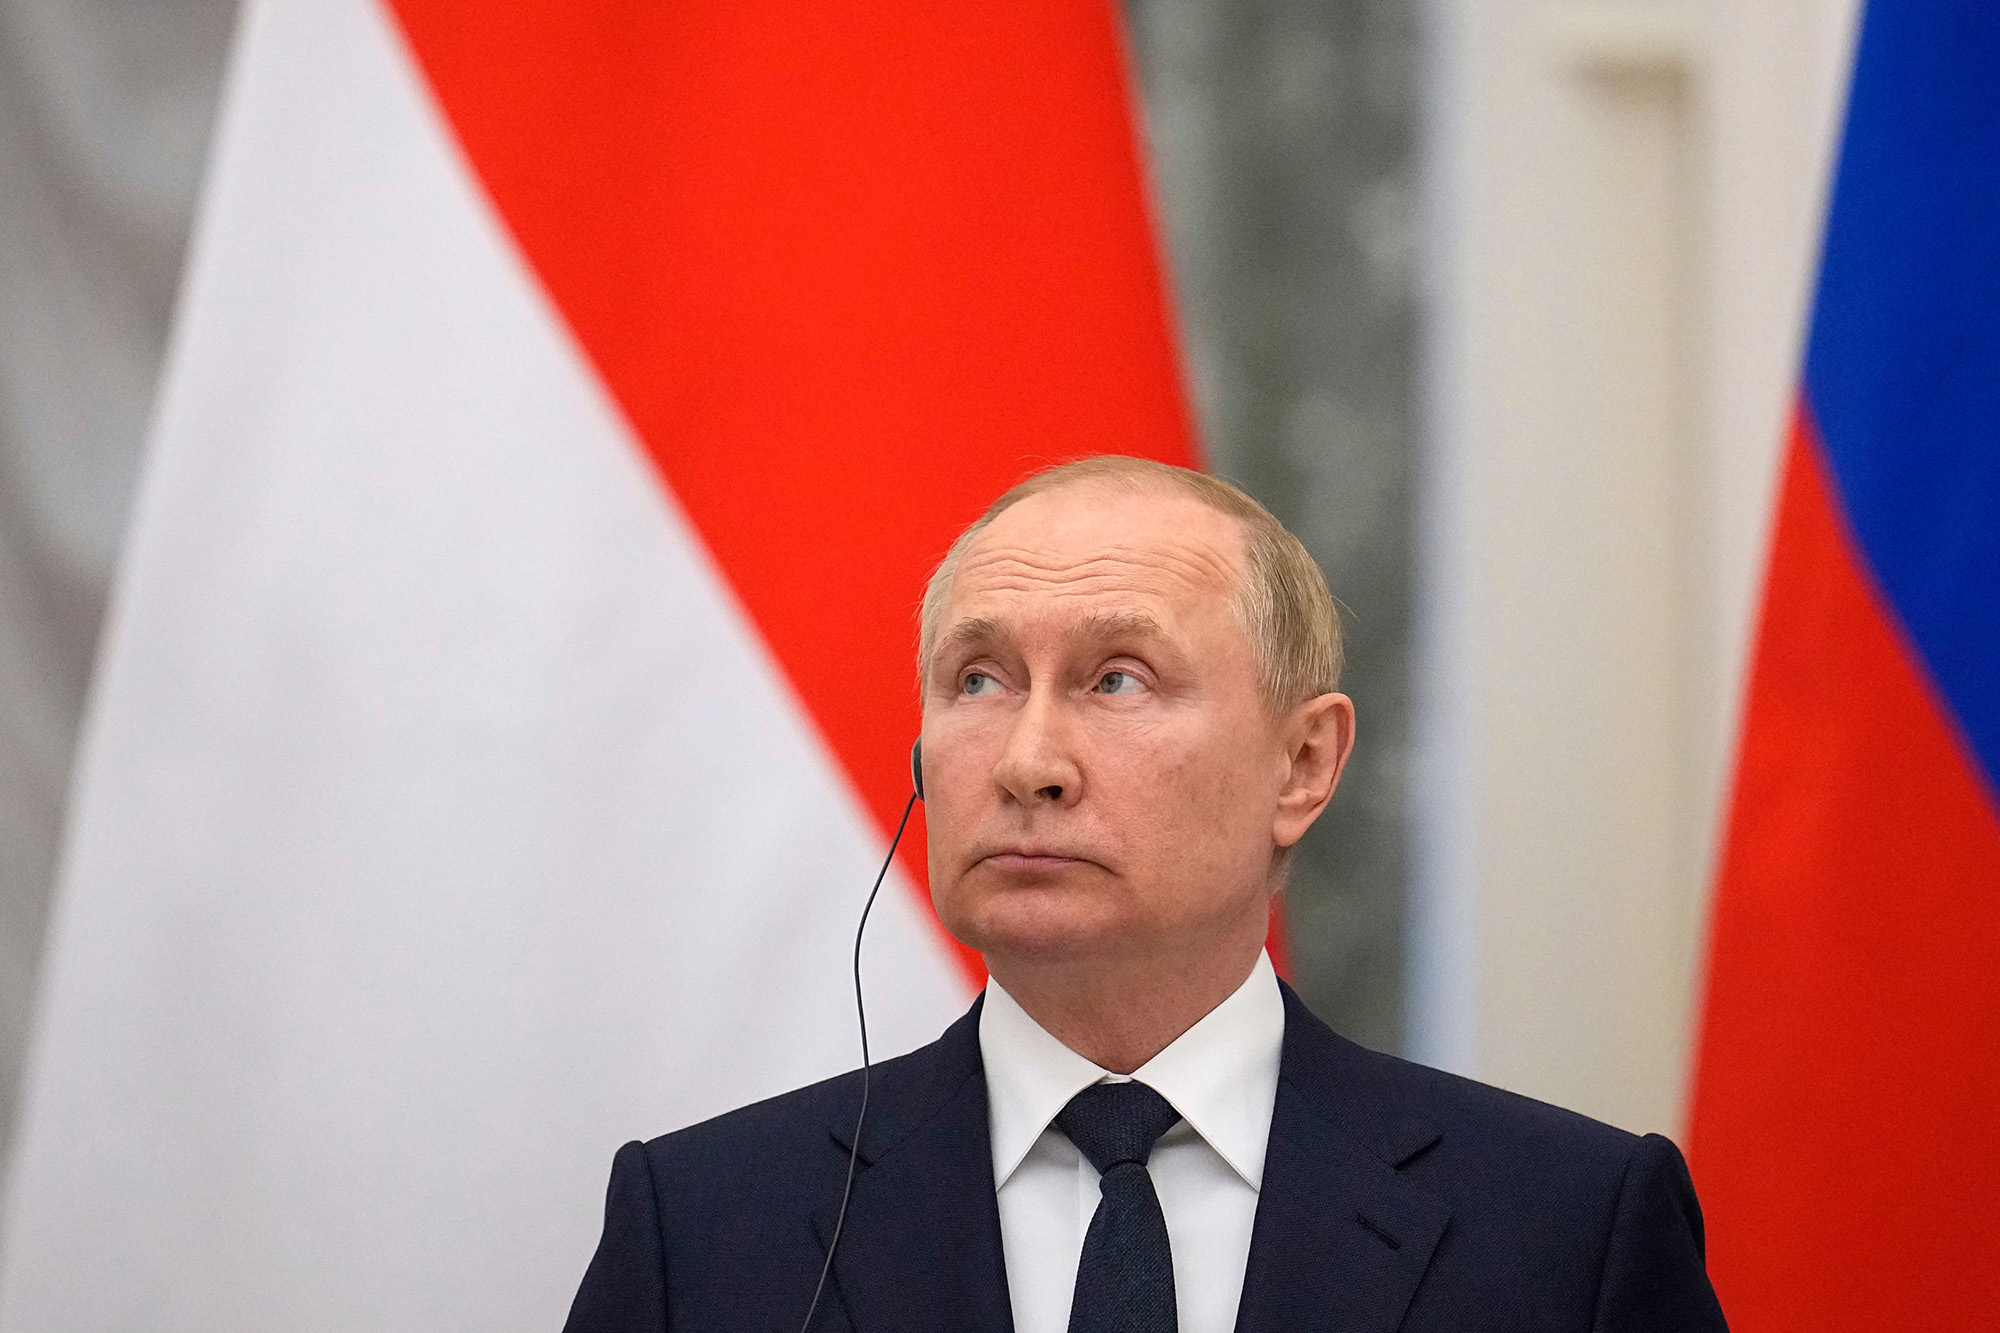 Russian President Vladimir Putin attends a news conference after meeting his Indonesian counterpart at the Kremlin in Moscow, Russia, on June 30.